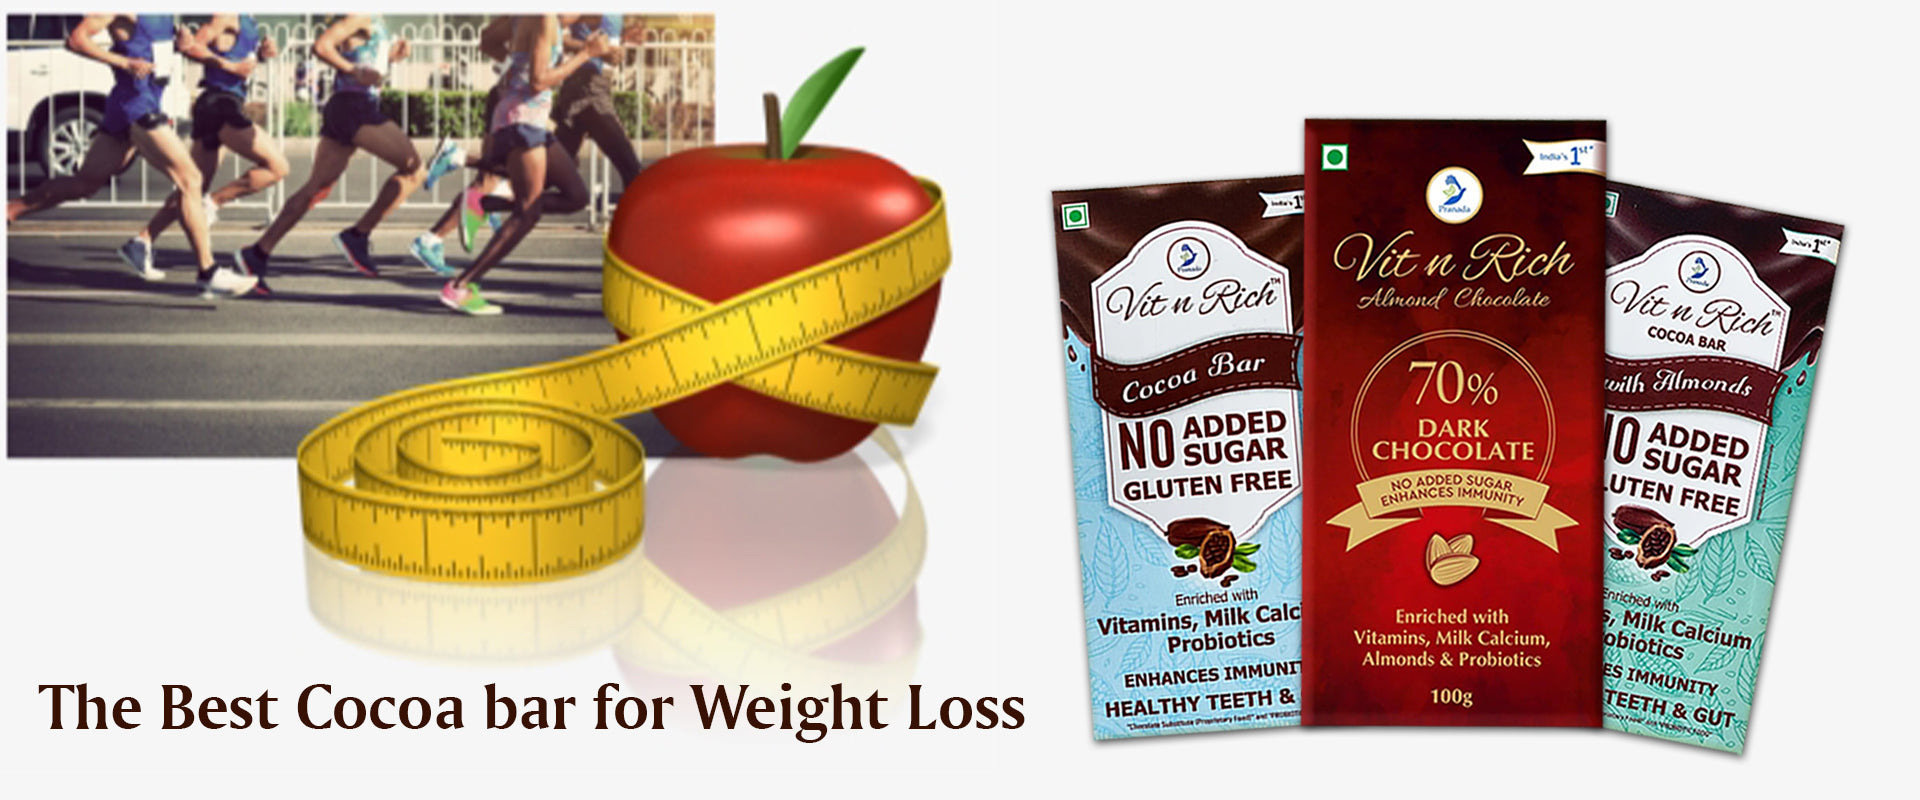 Vit- N- Rich The Best Chocolate for Weight Loss